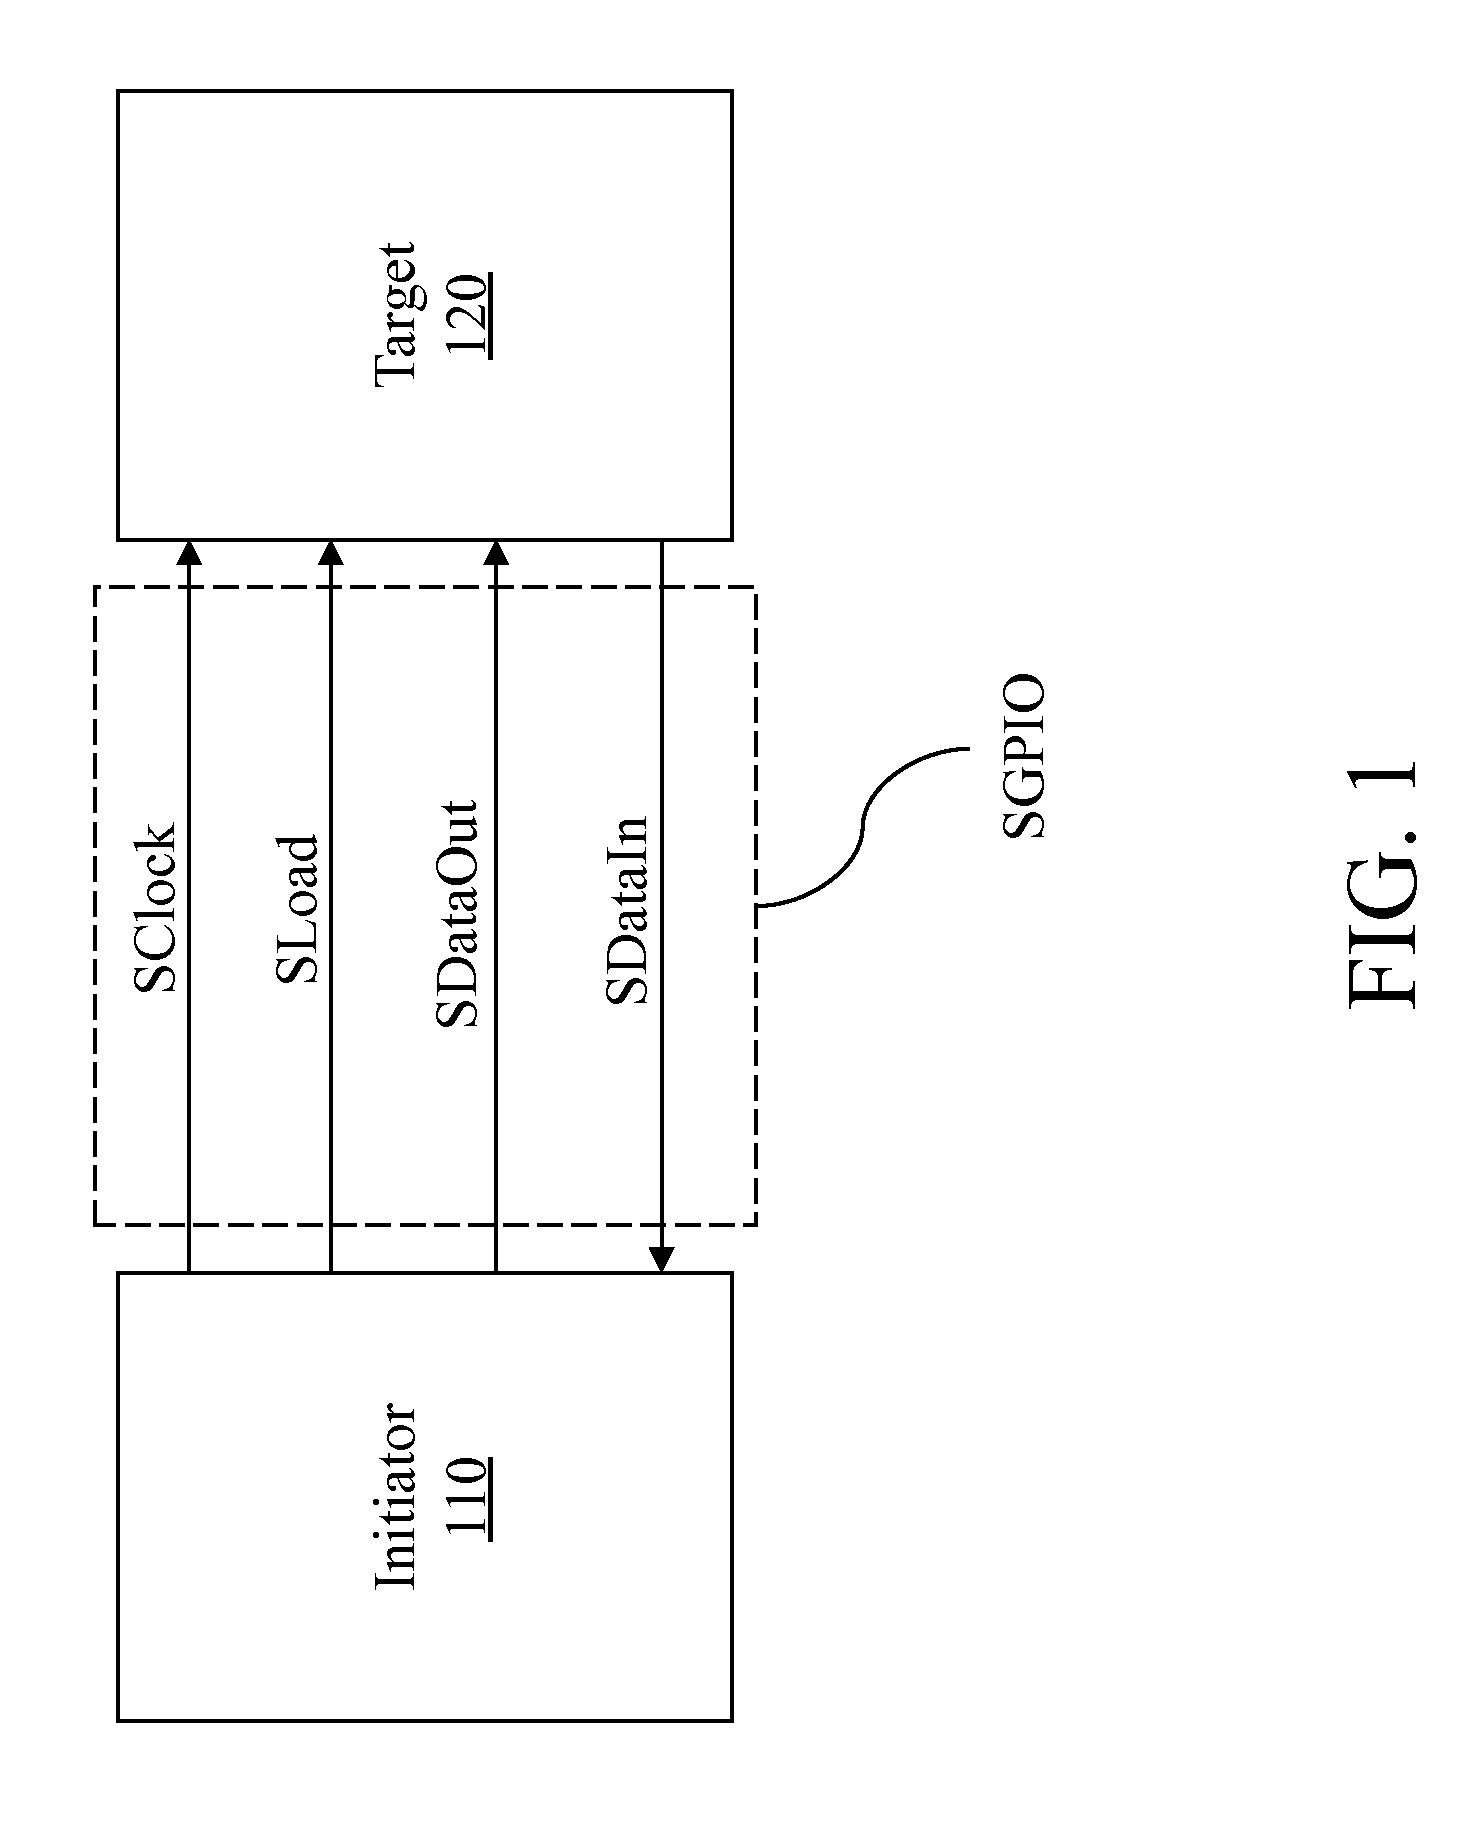 Automatic detection device, system and method for inter-integrated circuit and serial general purpose input/output